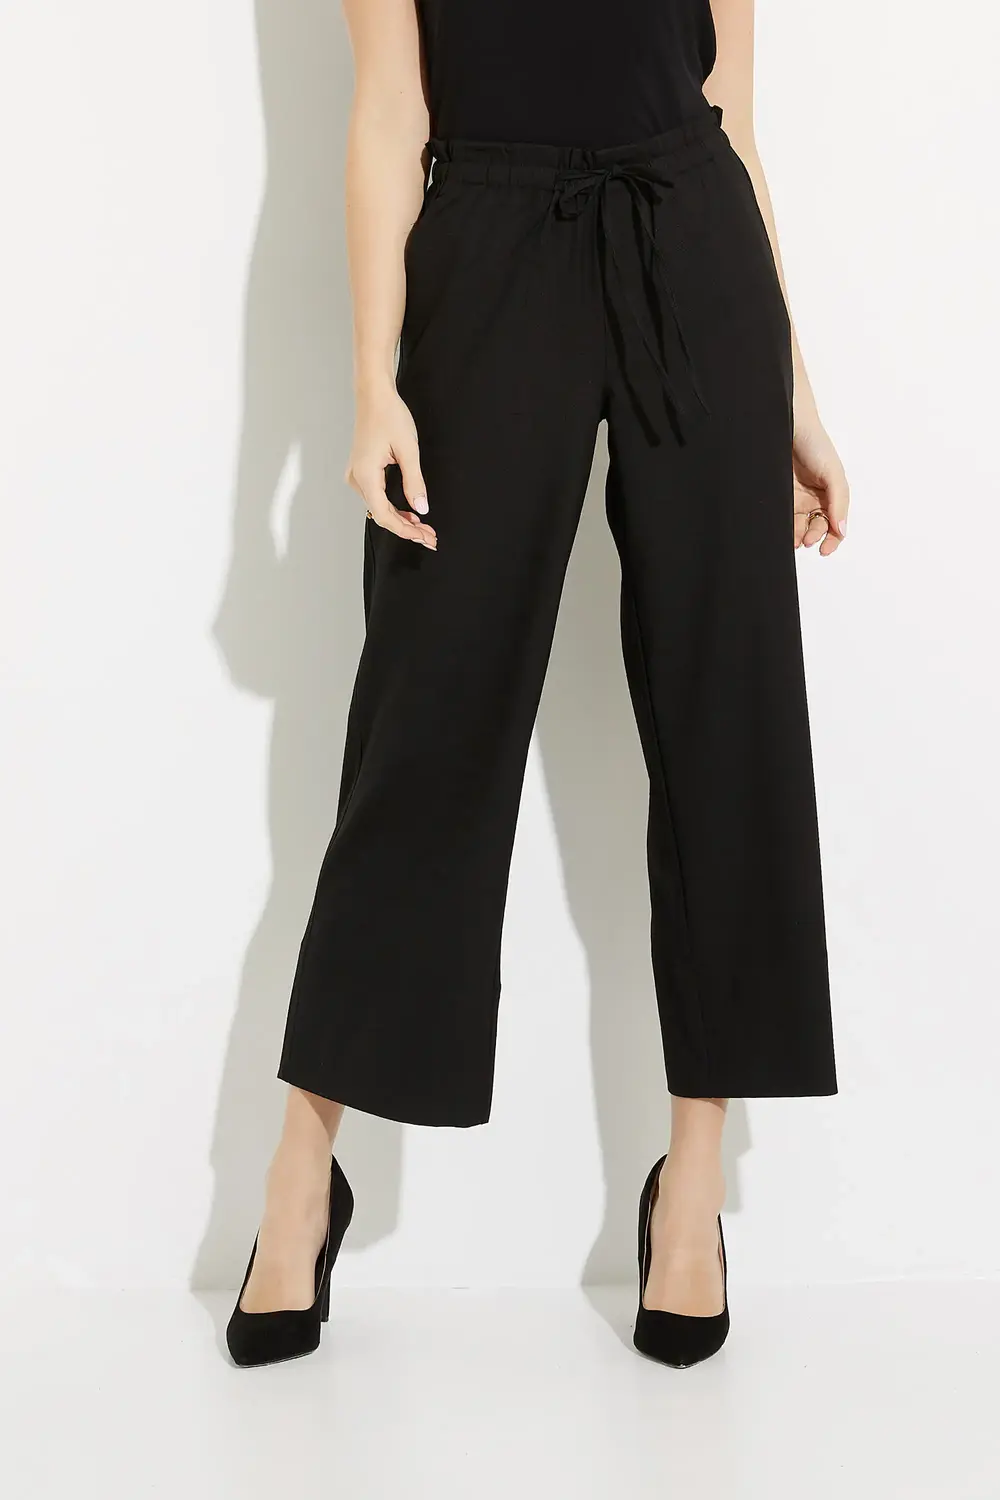 Pull-On Wide Leg Pants Style LM4463TS29. Black